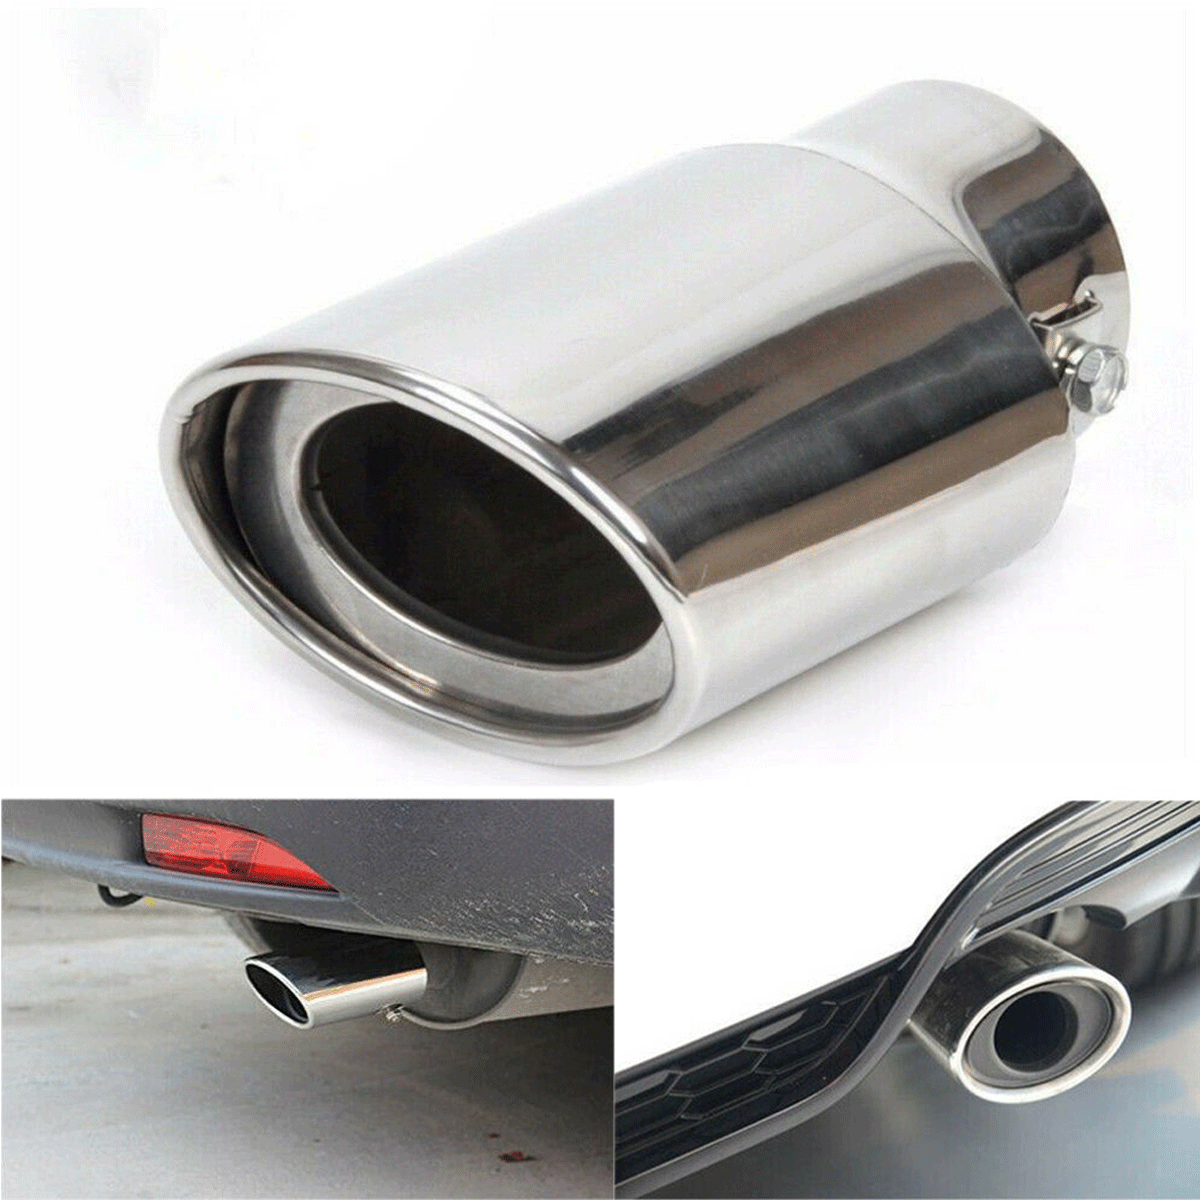 Details about   Universal Car Exhaust Tip Trim Pipe Tail Muffler Stainless Steel Chrome 